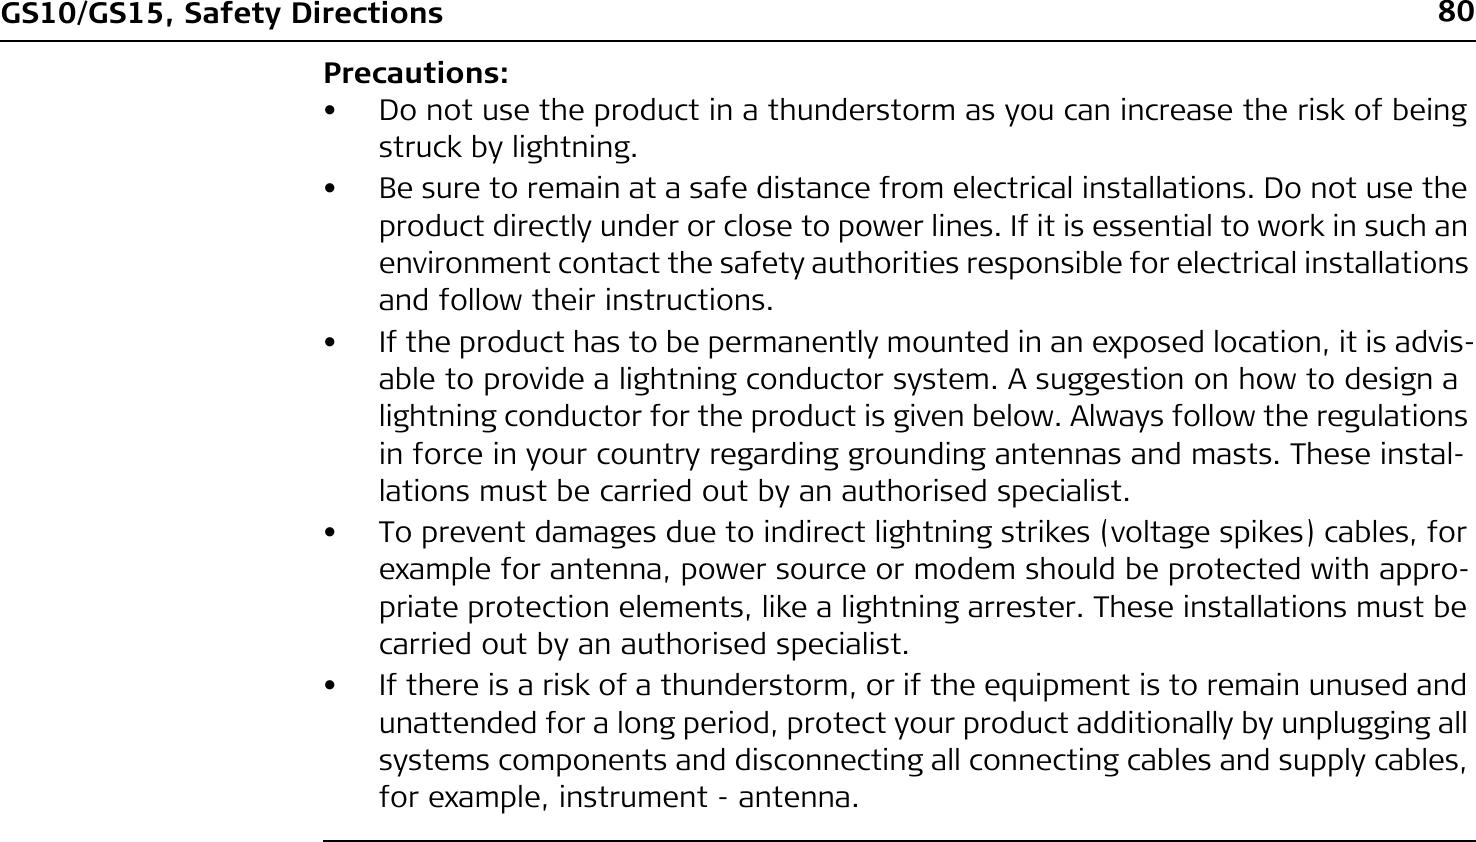 80GS10/GS15, Safety DirectionsPrecautions:• Do not use the product in a thunderstorm as you can increase the risk of being struck by lightning.• Be sure to remain at a safe distance from electrical installations. Do not use the product directly under or close to power lines. If it is essential to work in such an environment contact the safety authorities responsible for electrical installations and follow their instructions.• If the product has to be permanently mounted in an exposed location, it is advis-able to provide a lightning conductor system. A suggestion on how to design a lightning conductor for the product is given below. Always follow the regulations in force in your country regarding grounding antennas and masts. These instal-lations must be carried out by an authorised specialist.• To prevent damages due to indirect lightning strikes (voltage spikes) cables, for example for antenna, power source or modem should be protected with appro-priate protection elements, like a lightning arrester. These installations must be carried out by an authorised specialist.• If there is a risk of a thunderstorm, or if the equipment is to remain unused and unattended for a long period, protect your product additionally by unplugging all systems components and disconnecting all connecting cables and supply cables, for example, instrument - antenna.